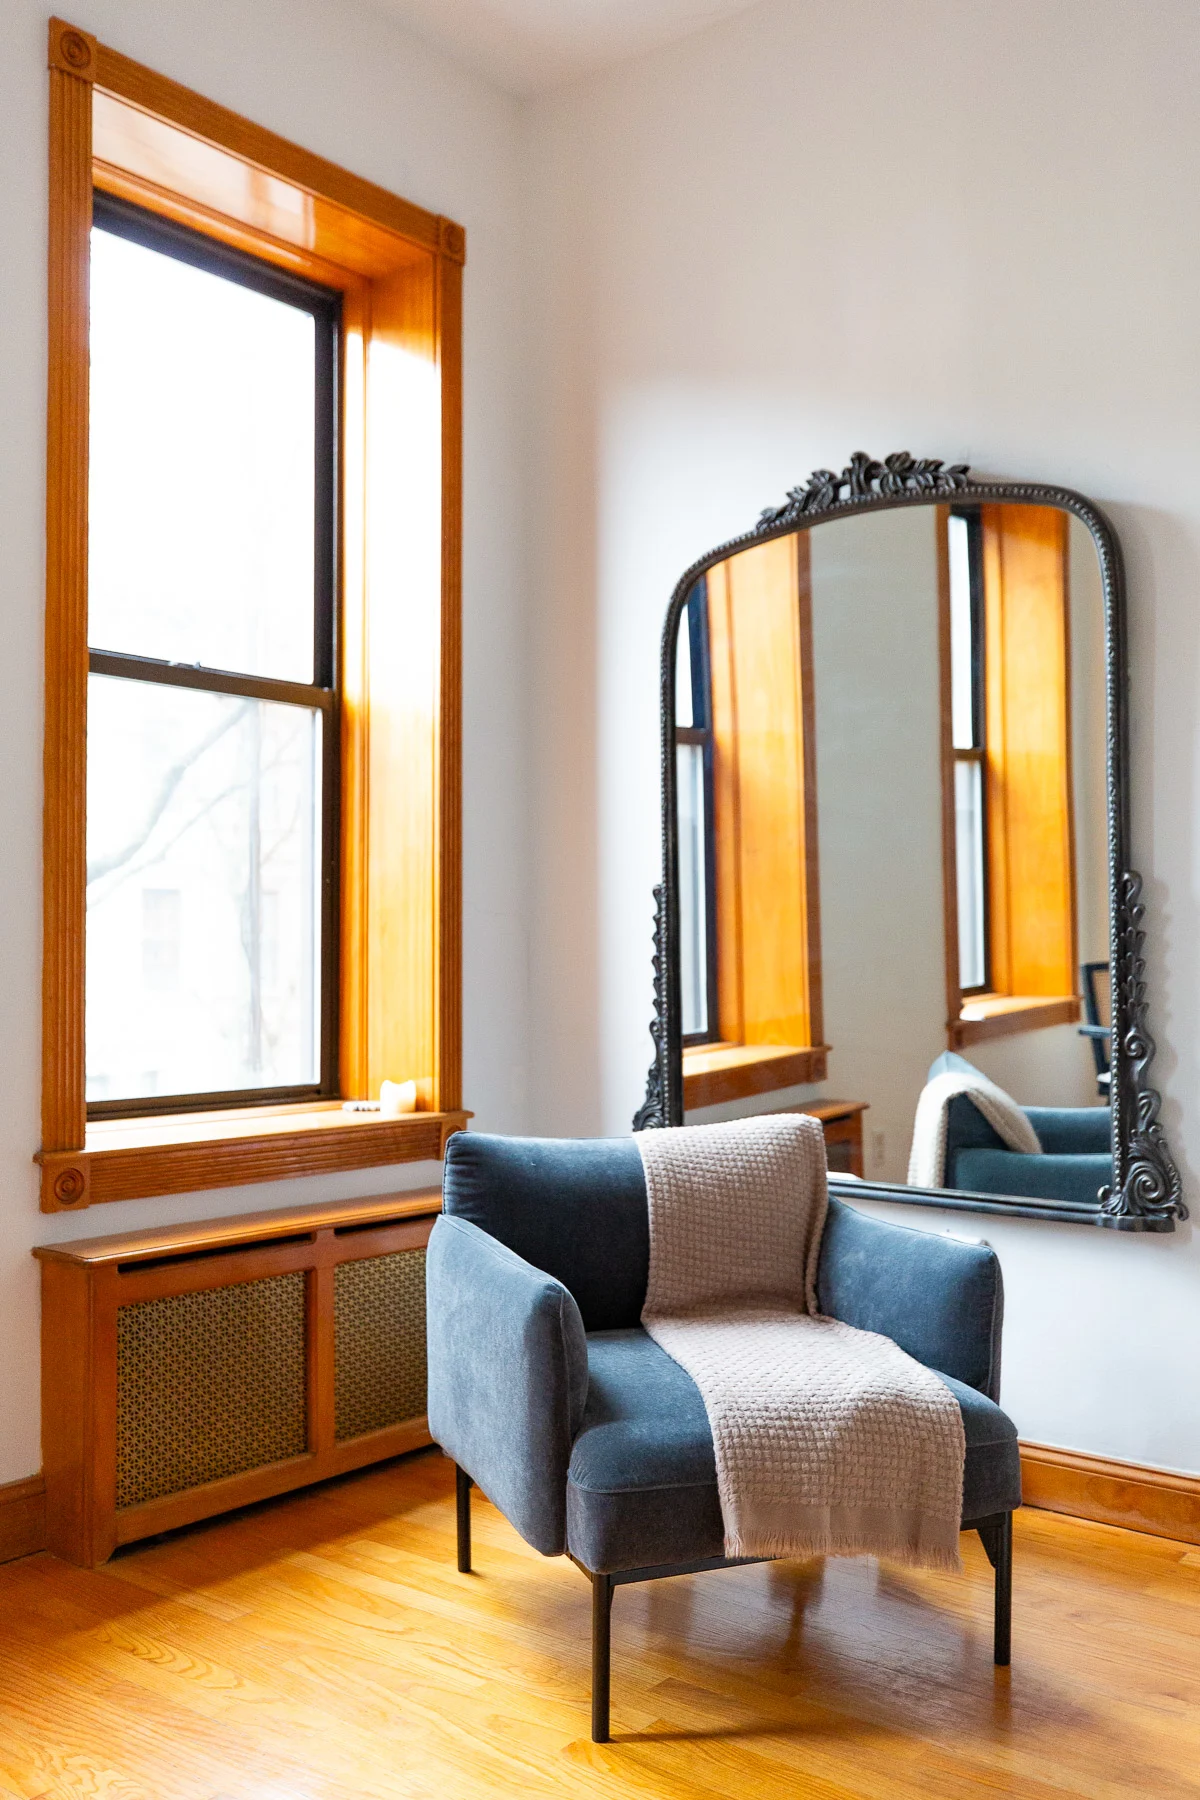 Anthropologie Mirror, How to Live in a small NYC Apartment